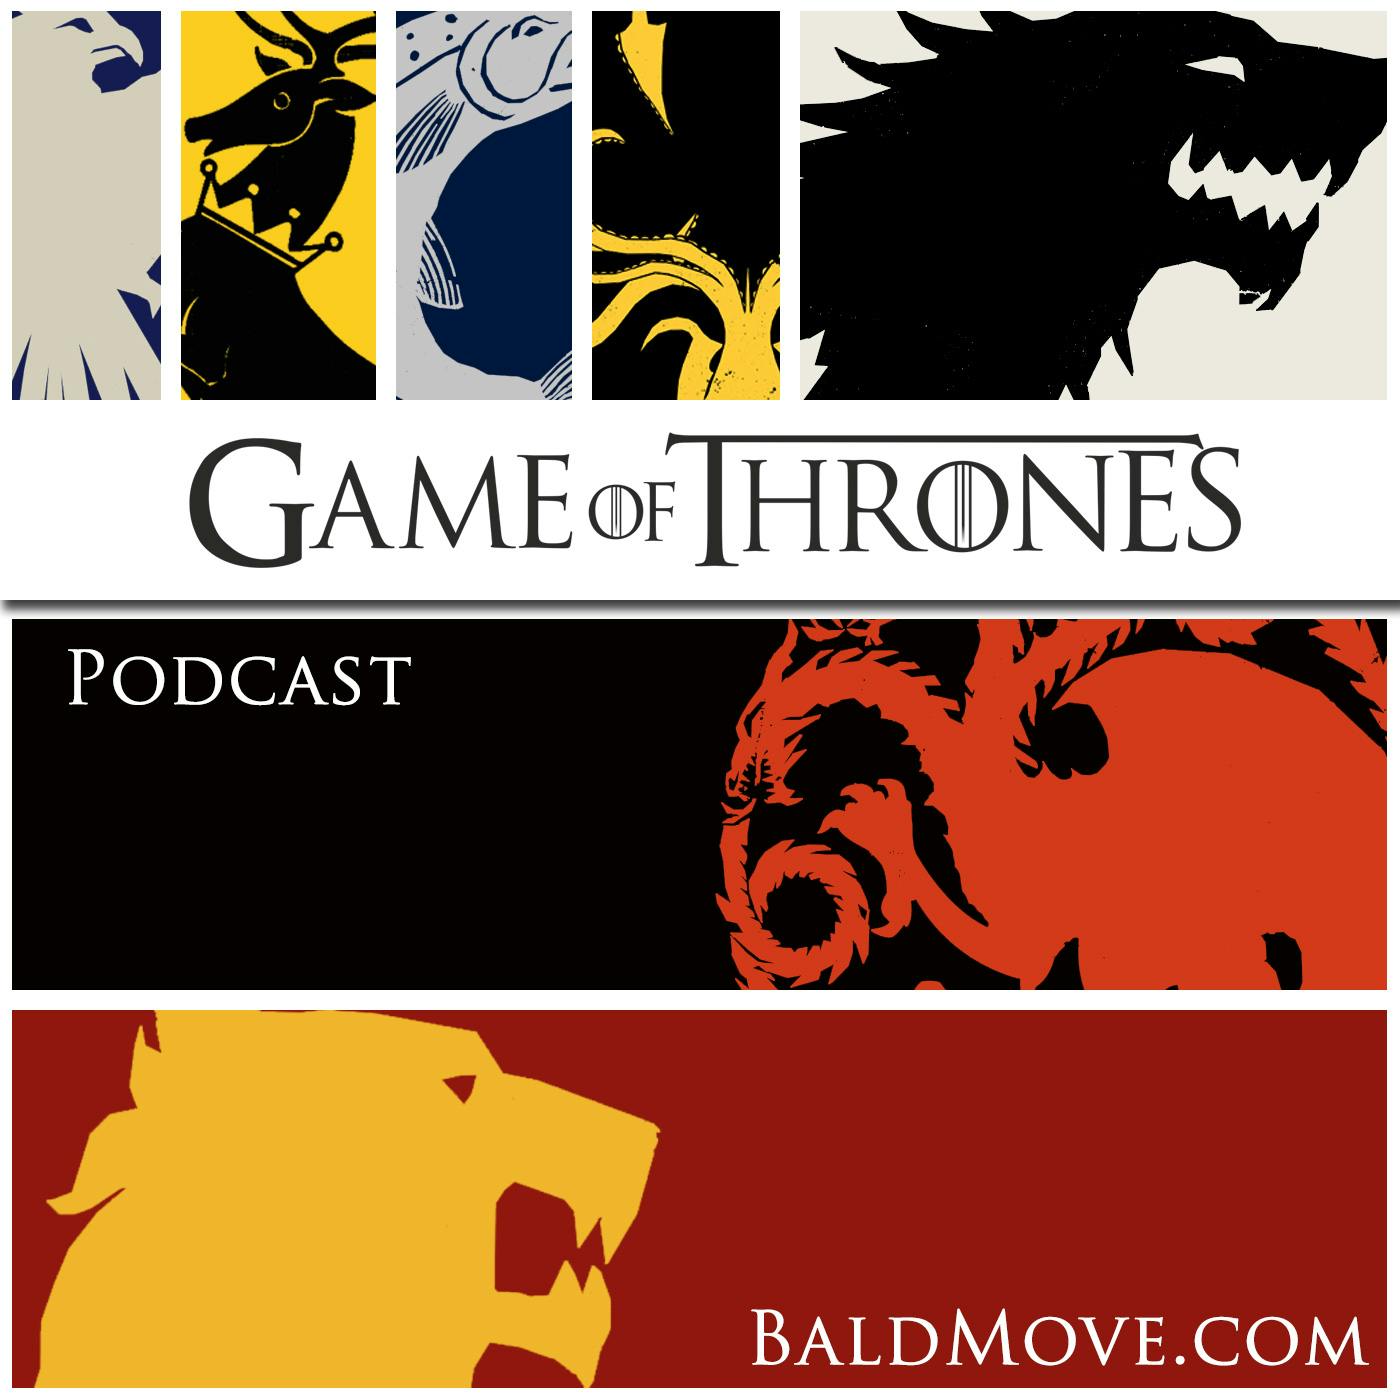 "House of the Dragon" and other Game of Thrones News